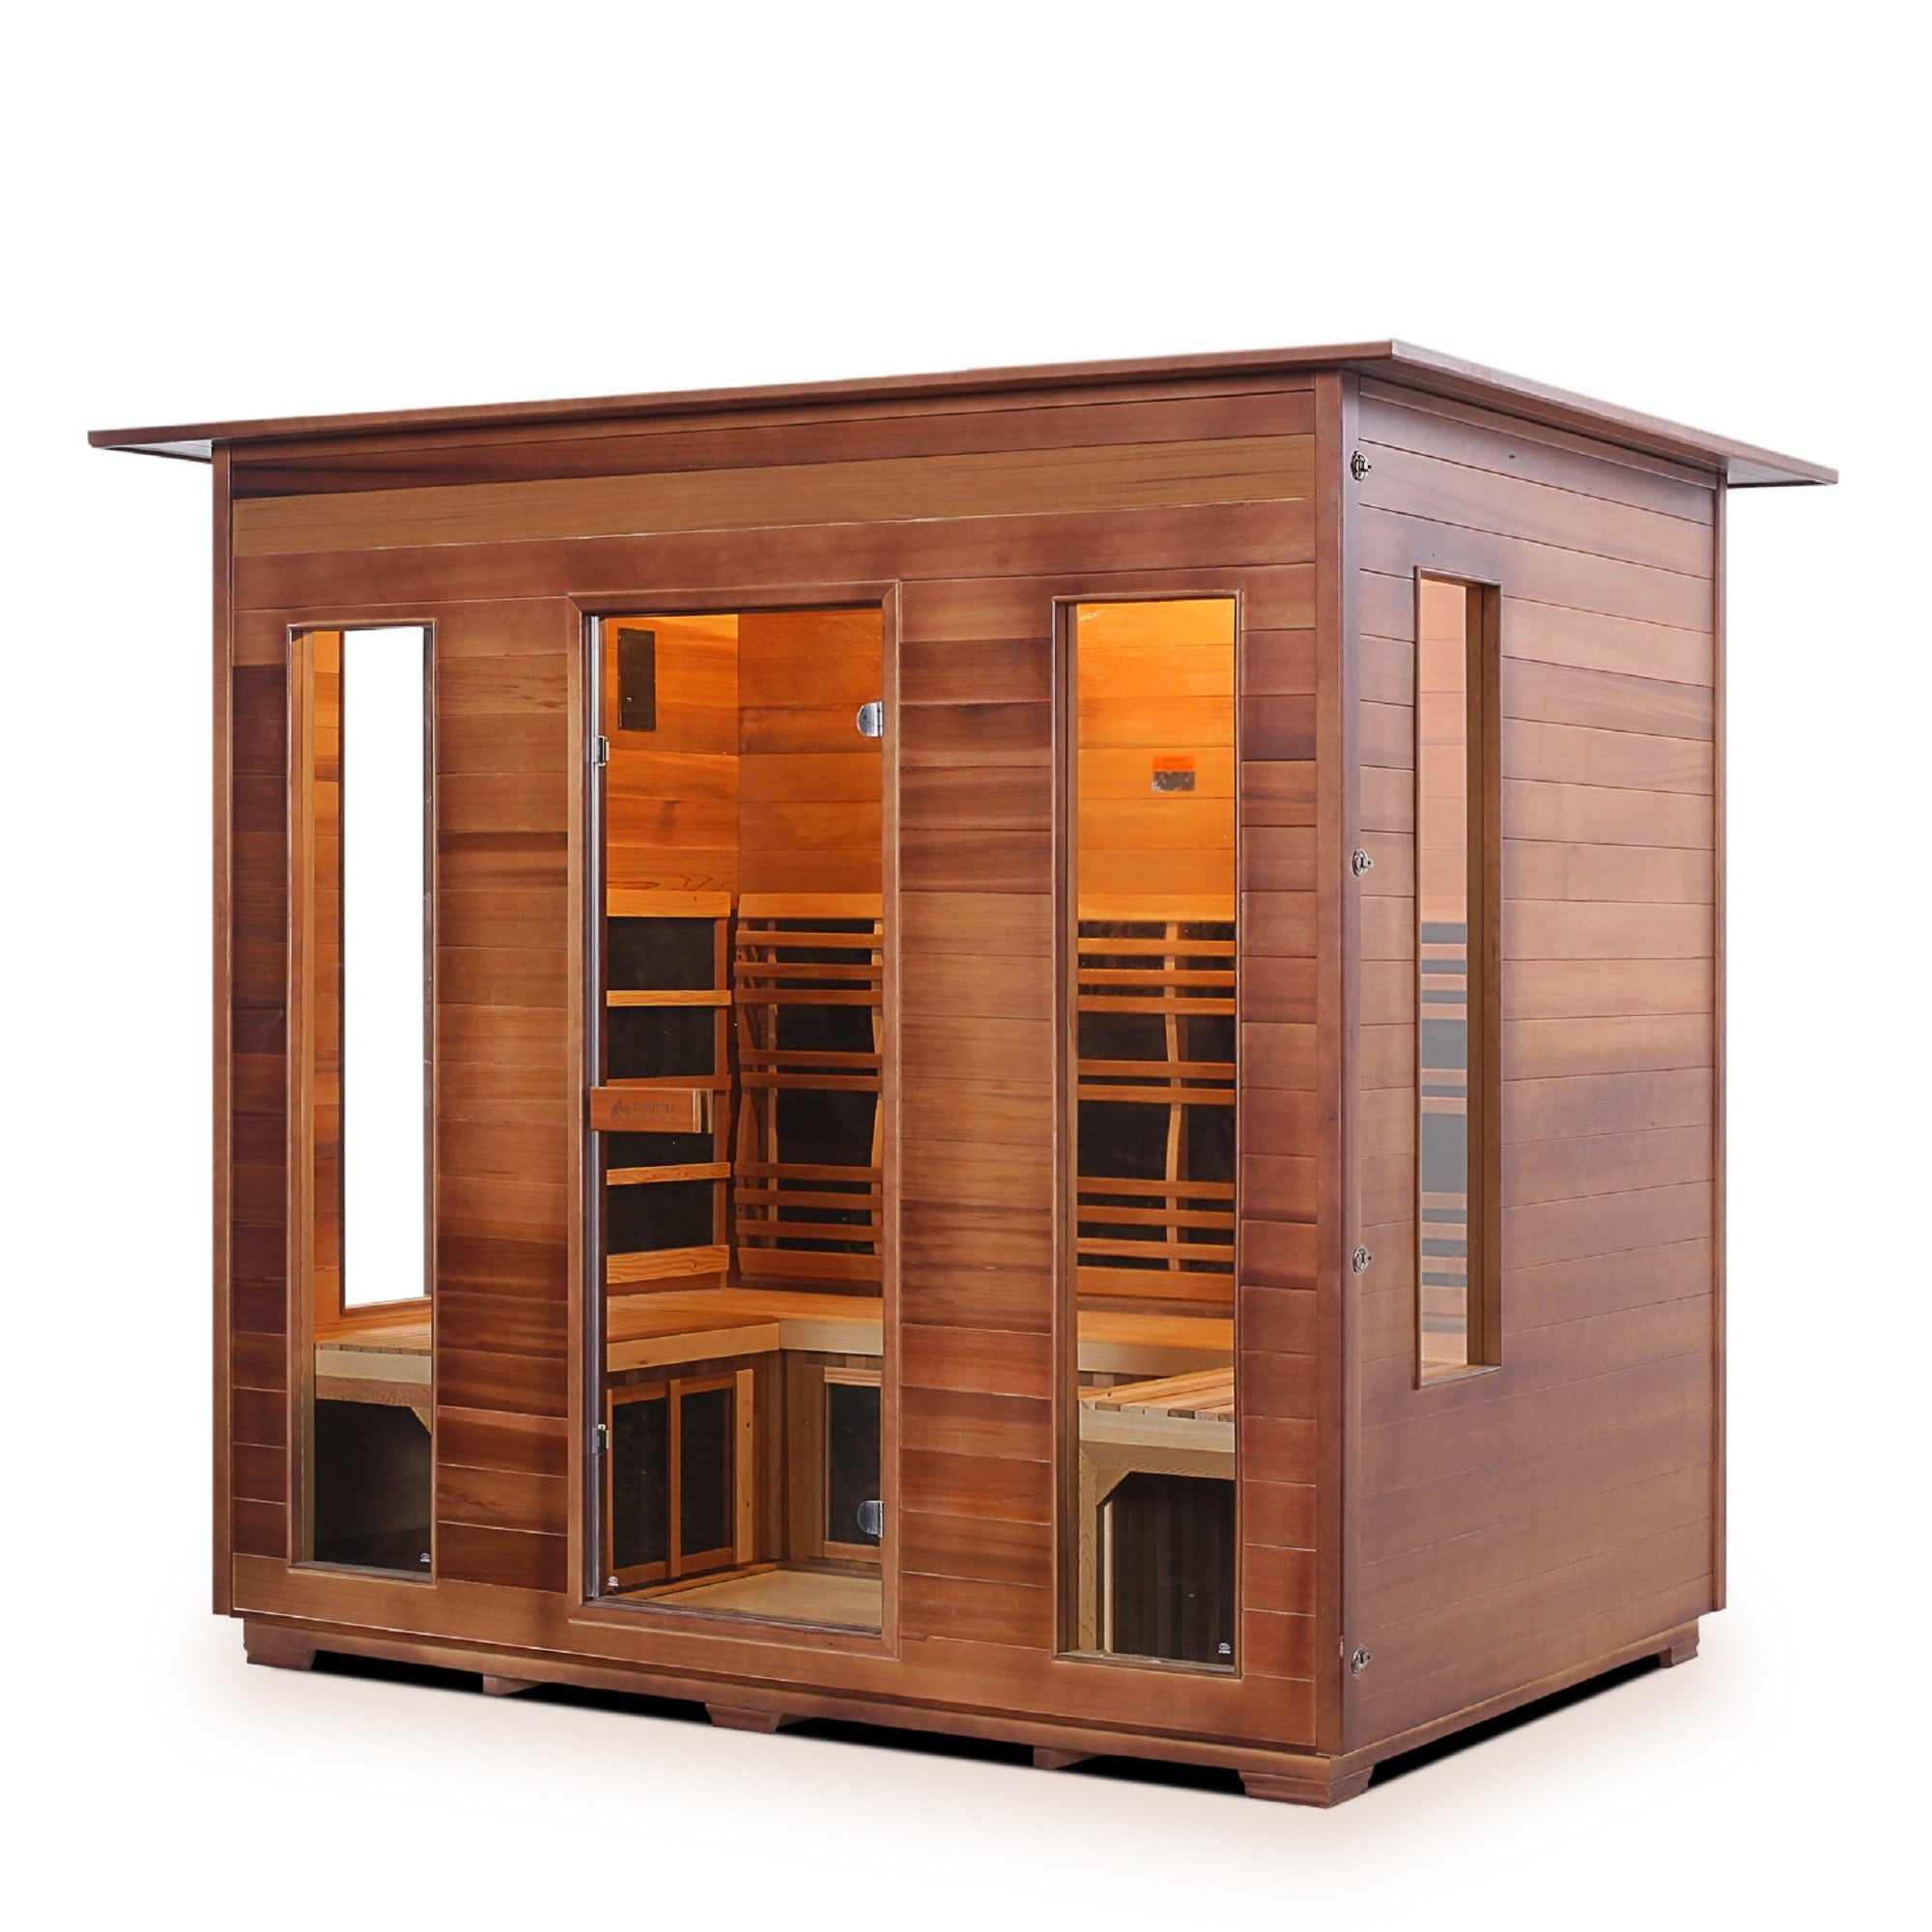 InfraNature Original Infrared Rustic 5 Person Indoor Canadian Cedar Wood indoor roofed with glass door and windows front view - Vital Hydrotherapy